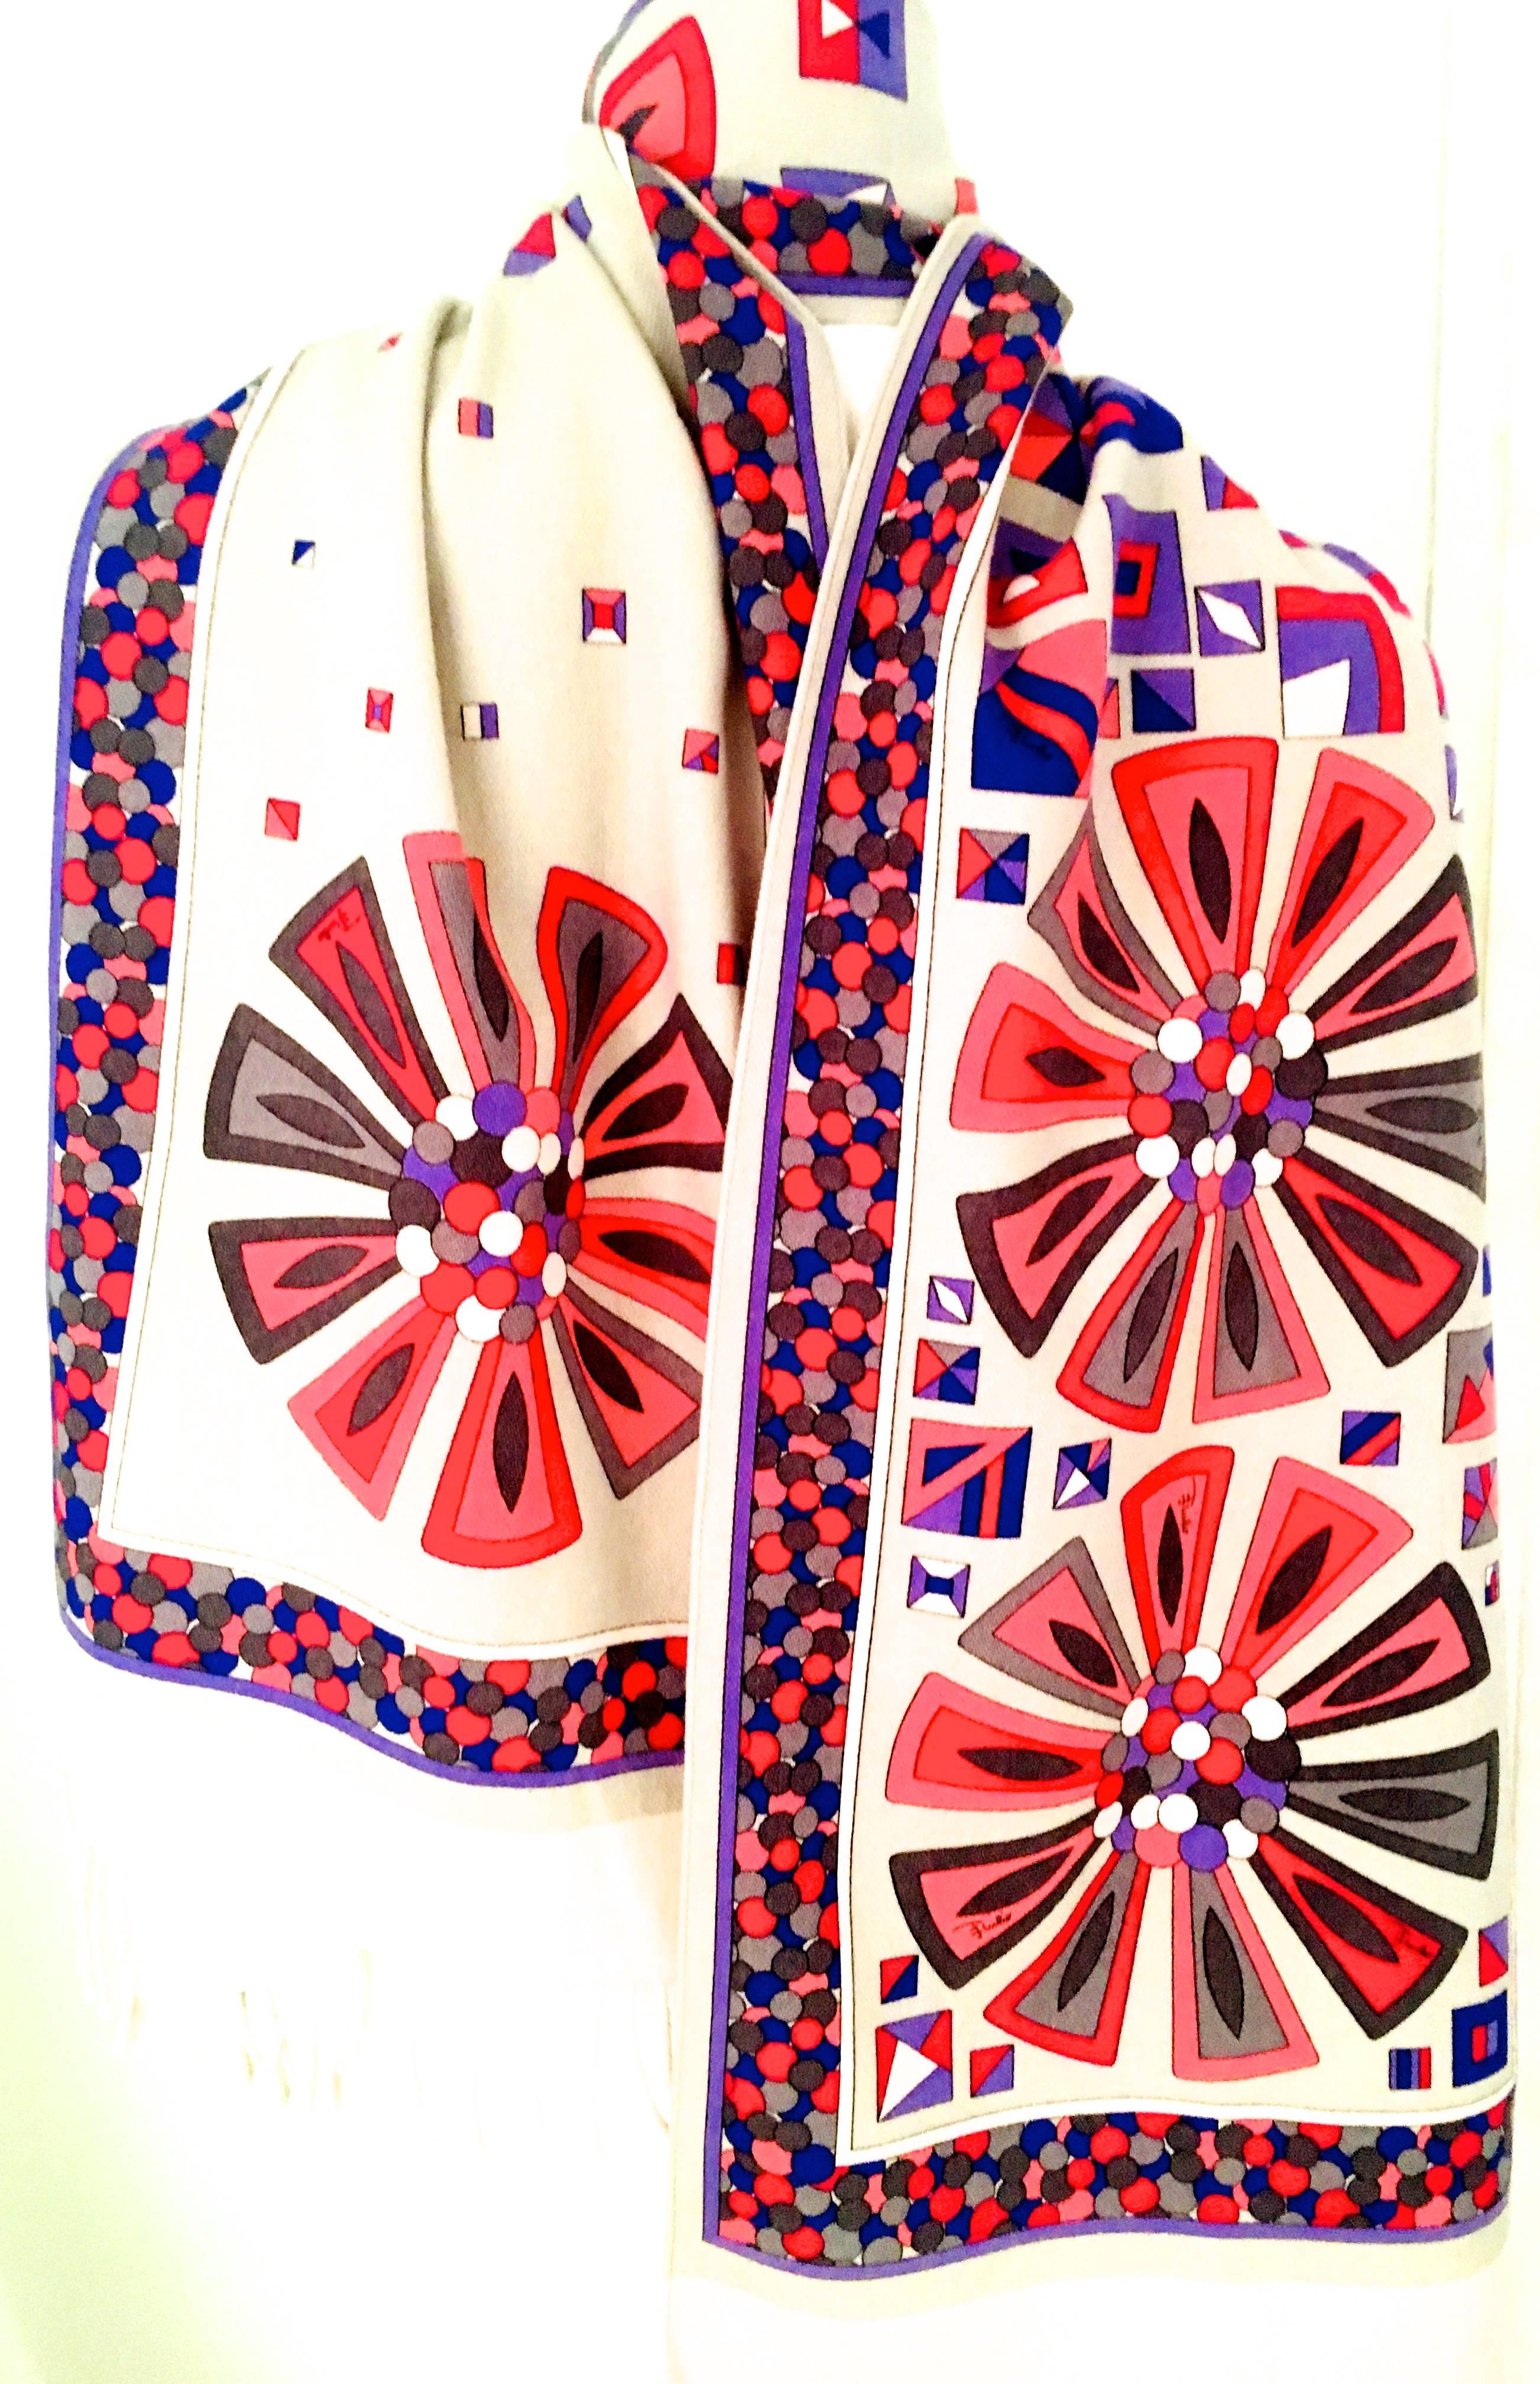 Presented here is a beautiful scarf from Emilio Pucci. This rare scarf is made from a blend of 60% wool, 35% cashmere and 5% silk. The design is a series of shapes arranged in circular patterns in the center. There is a border around the perimeter